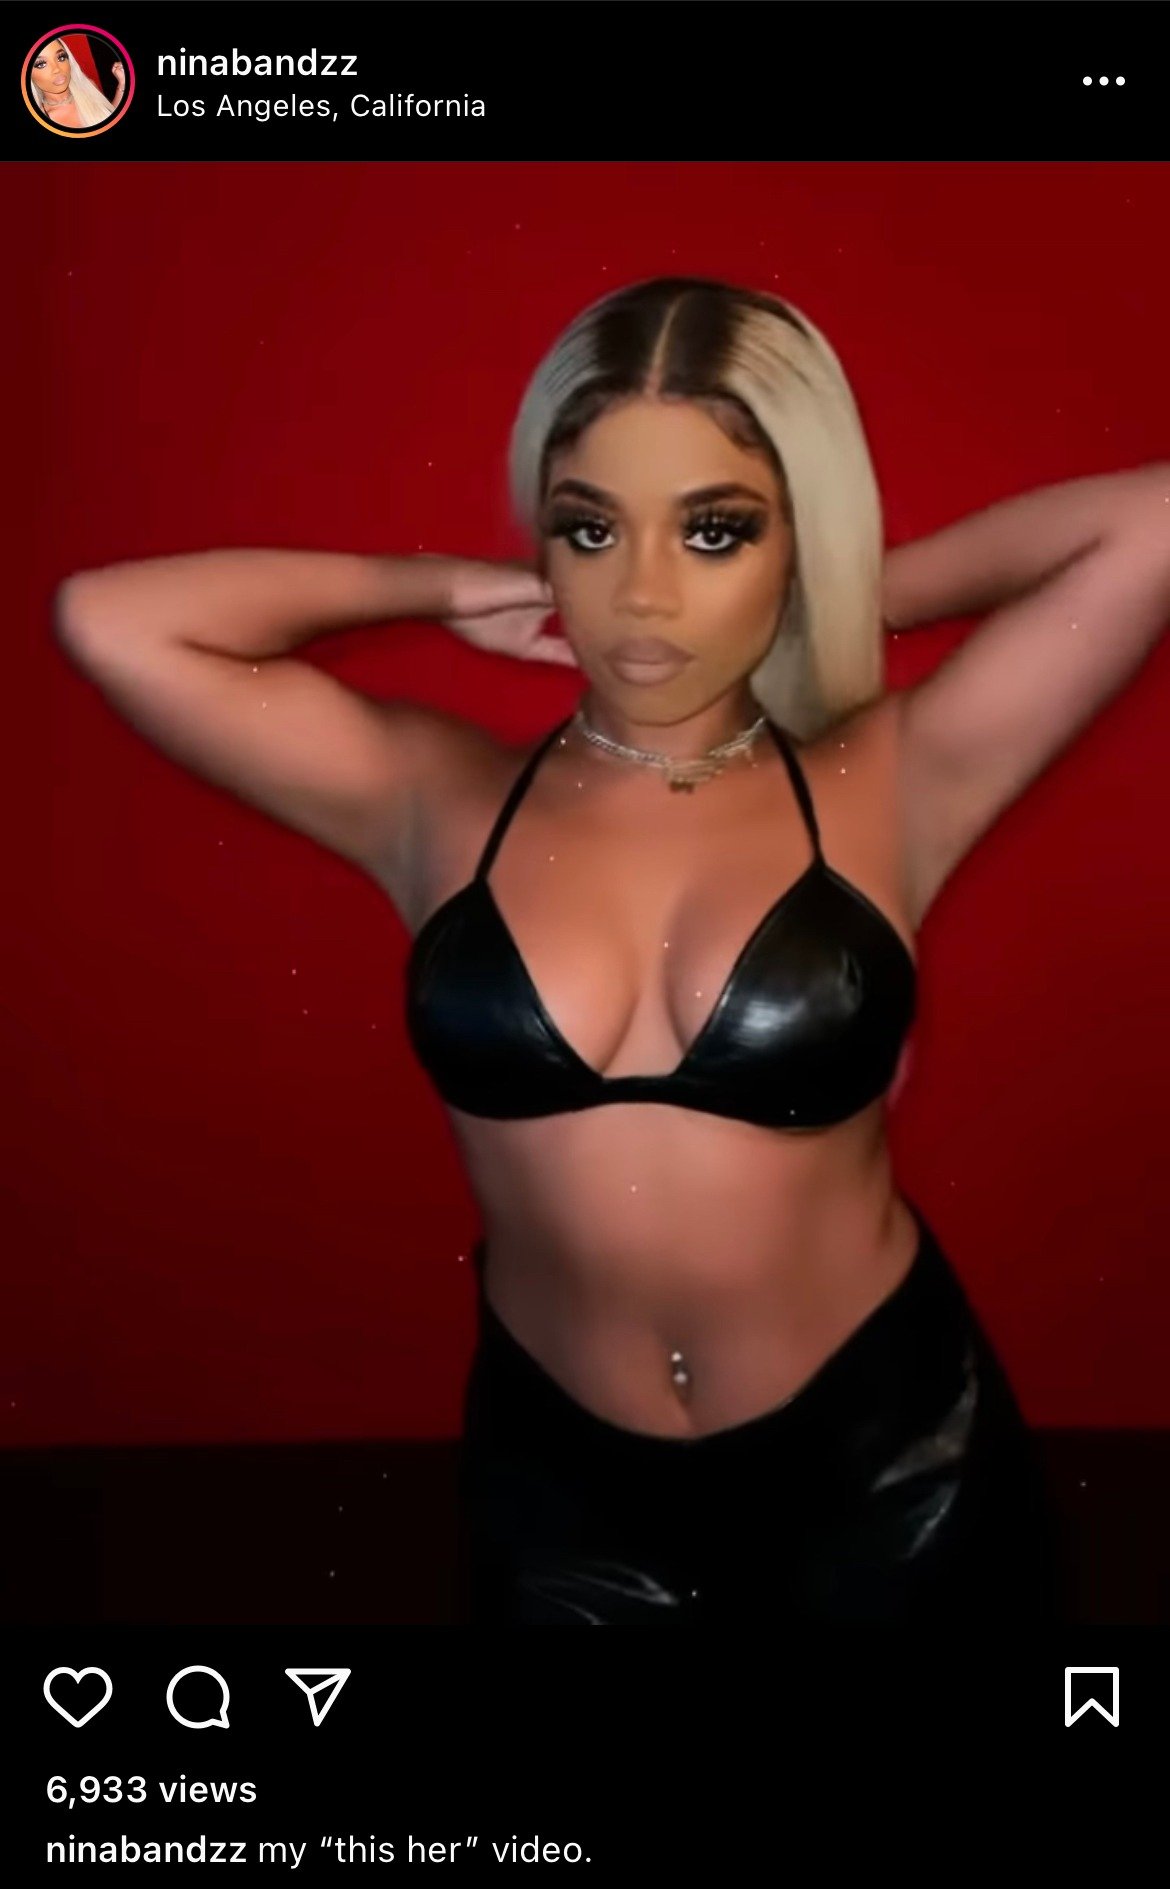 A clip of Nina-Symone Smith flaunts her sassiness while wearing a black bra and showing her navel piercing. | Photo: instagram.com/ninabandzz